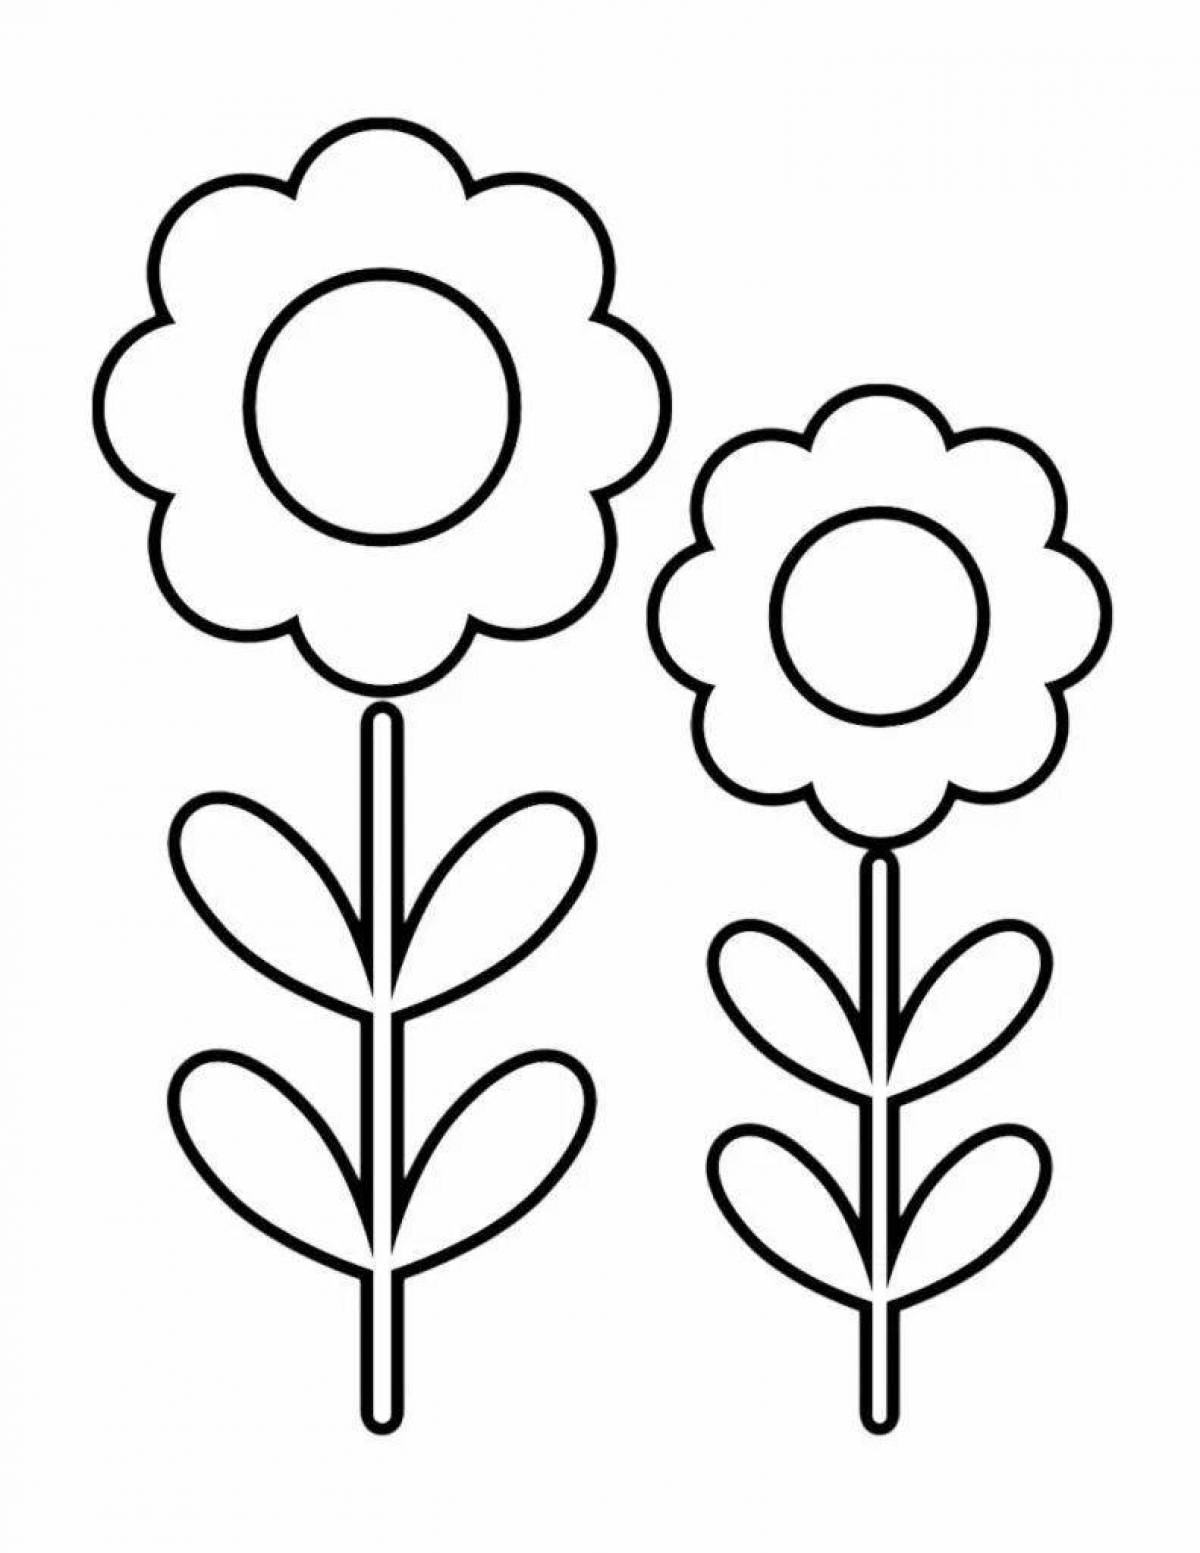 Fascinating flower coloring book for 4-5 year olds